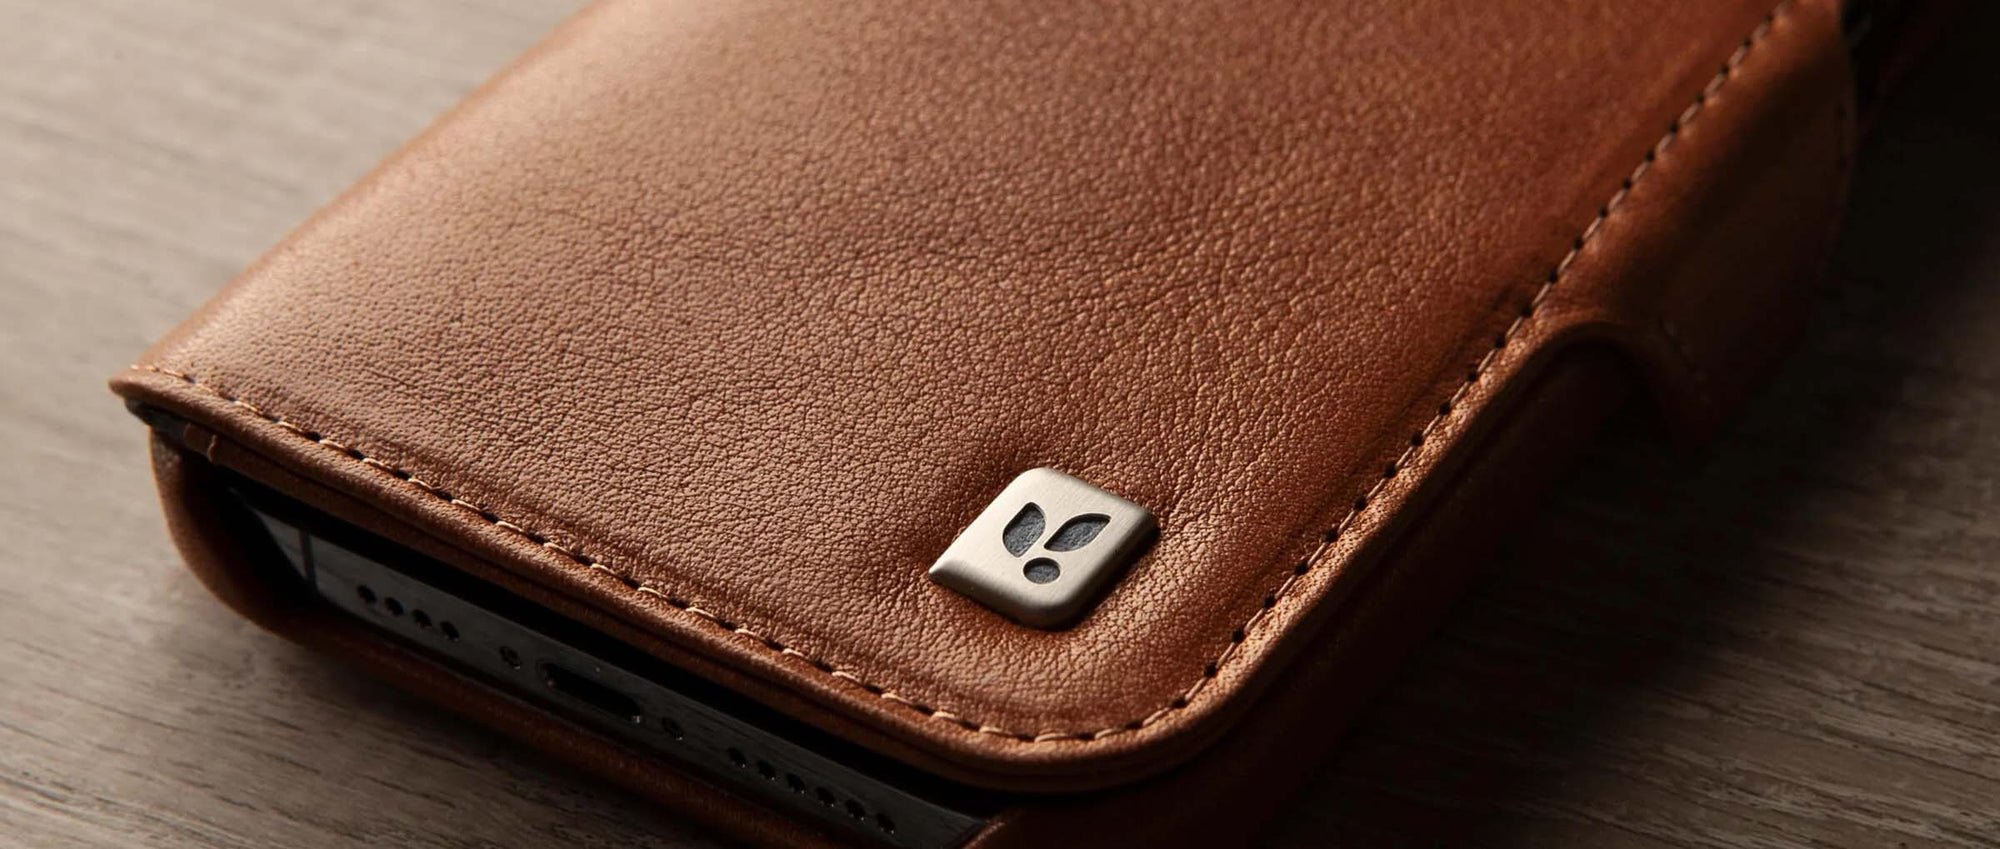 Top 5 Luxury Leather iPhone Cases - Customize Yours Today Online at Vaja